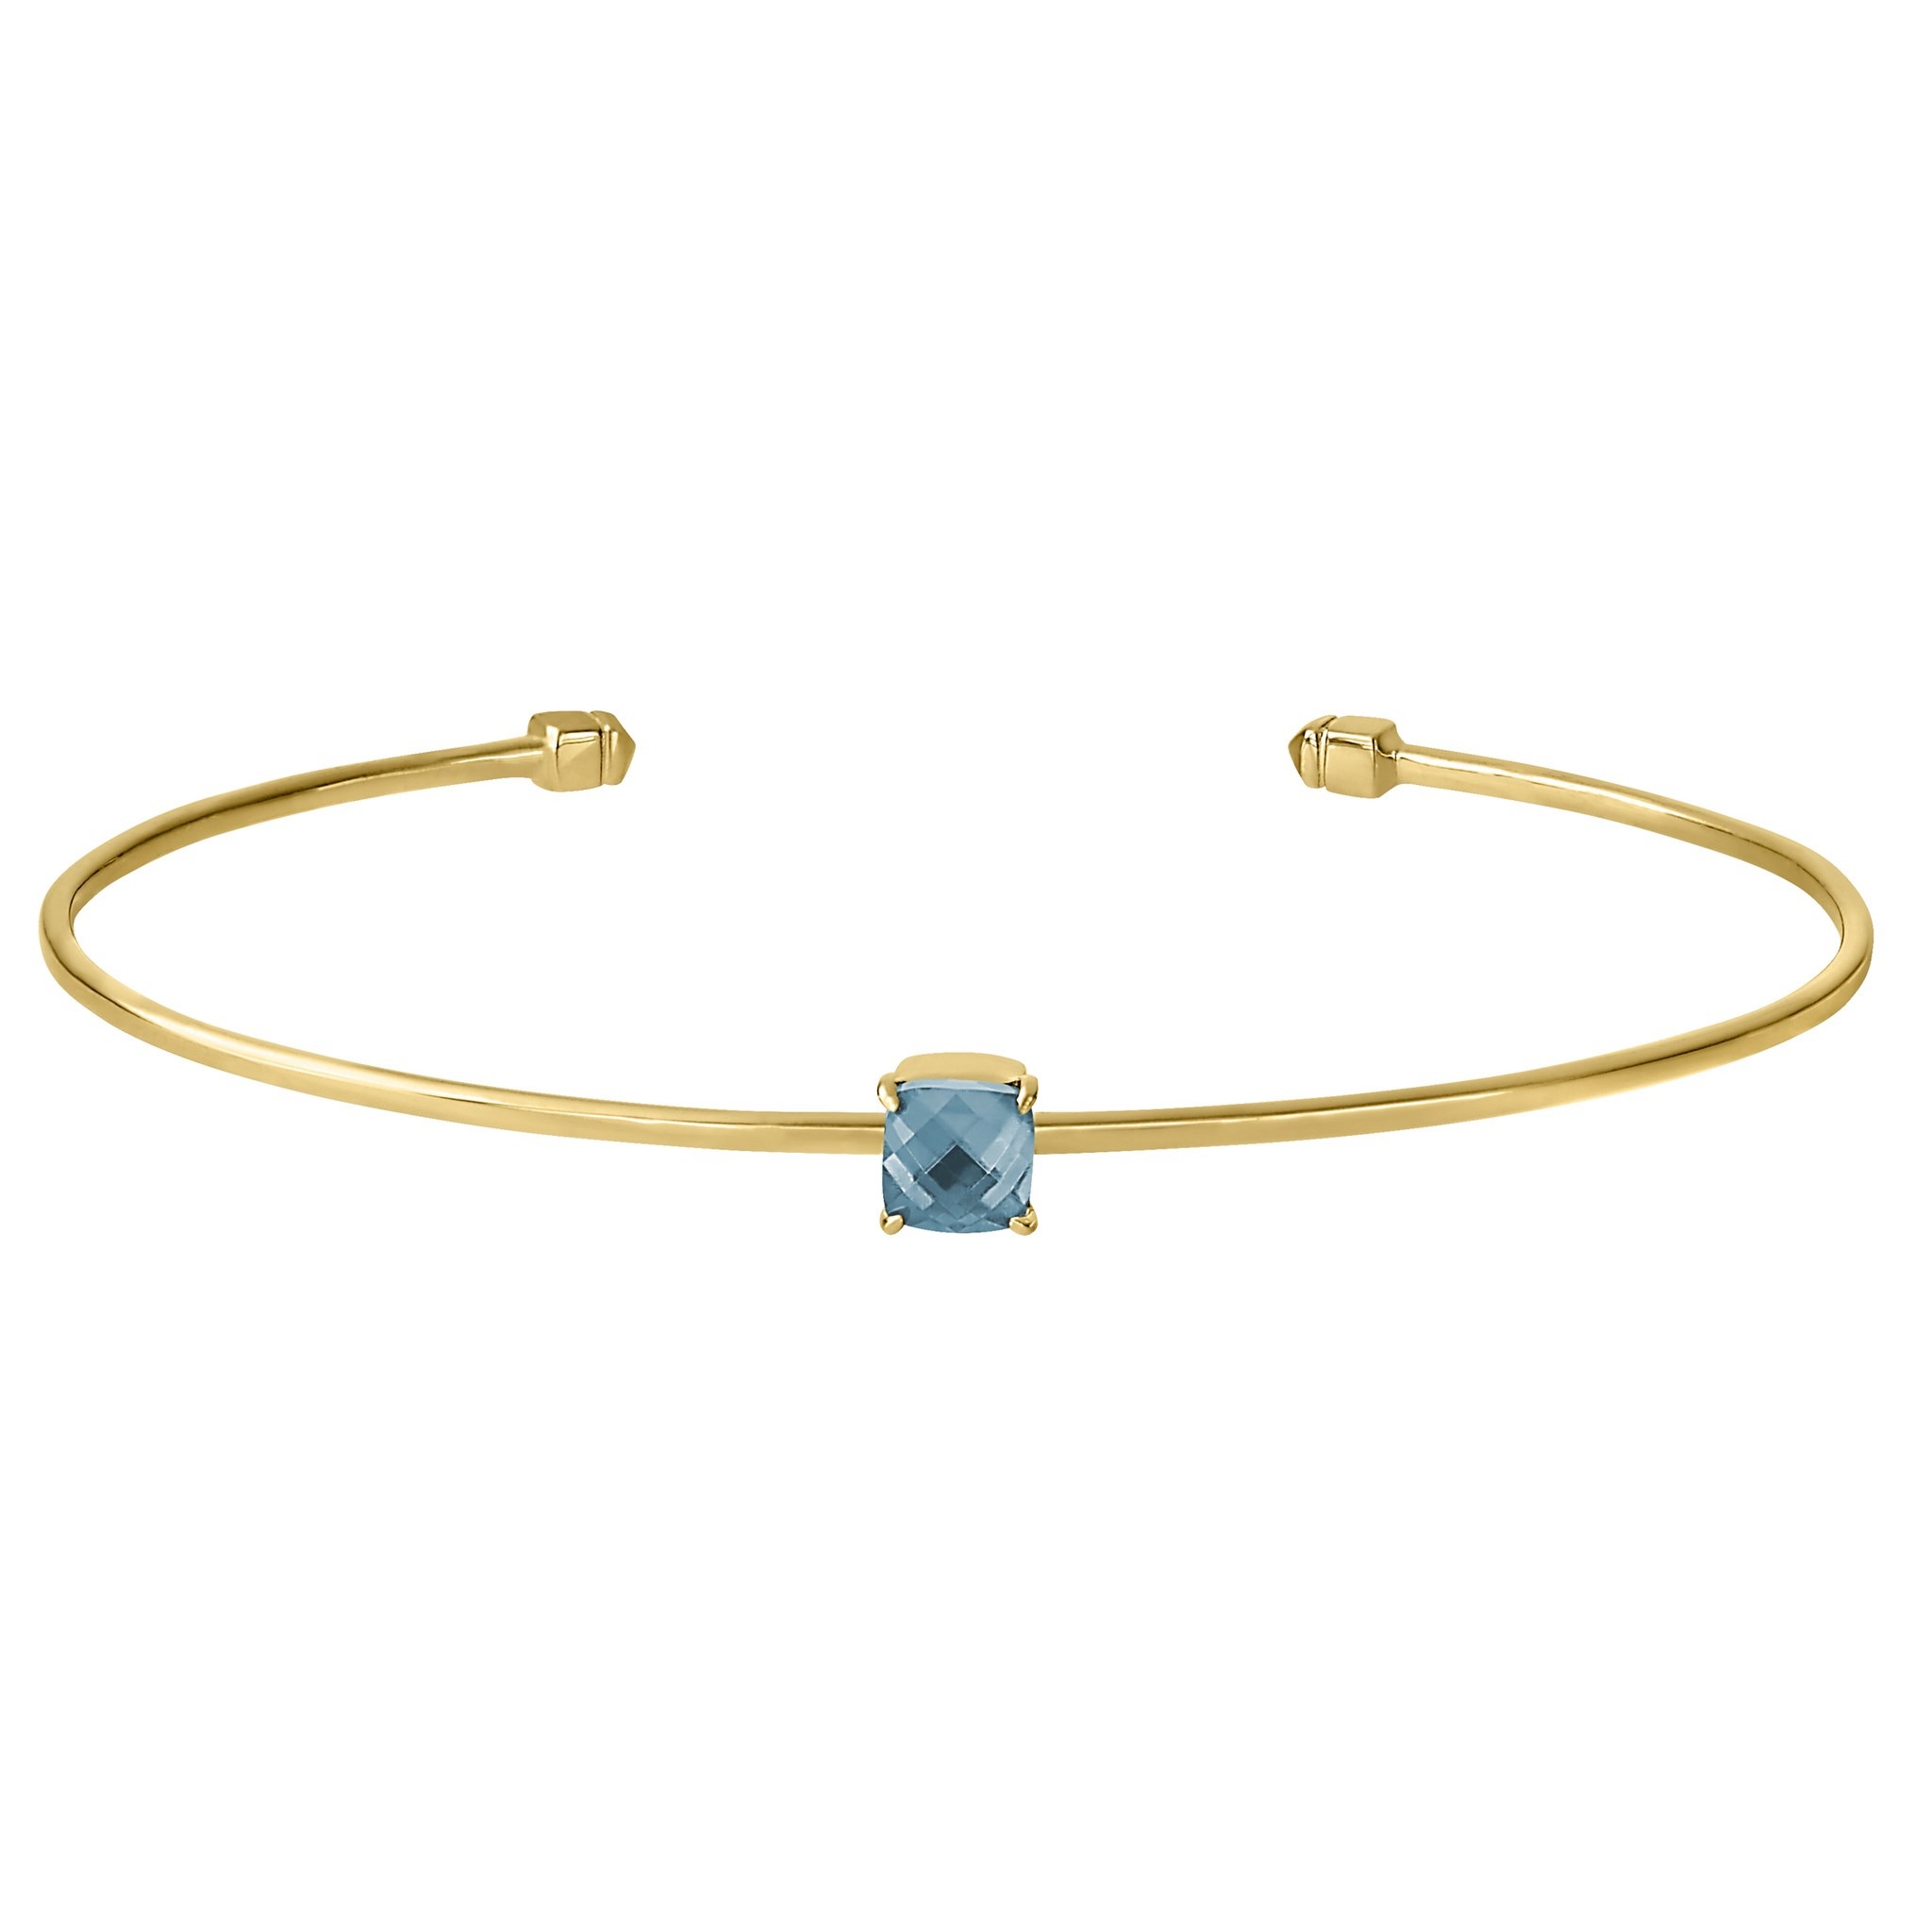 Gold Finish Sterling Silver Pliable Cuff Bracelet with Faceted Cushion Cut Simulated Aqua Marine Birth Gem - March